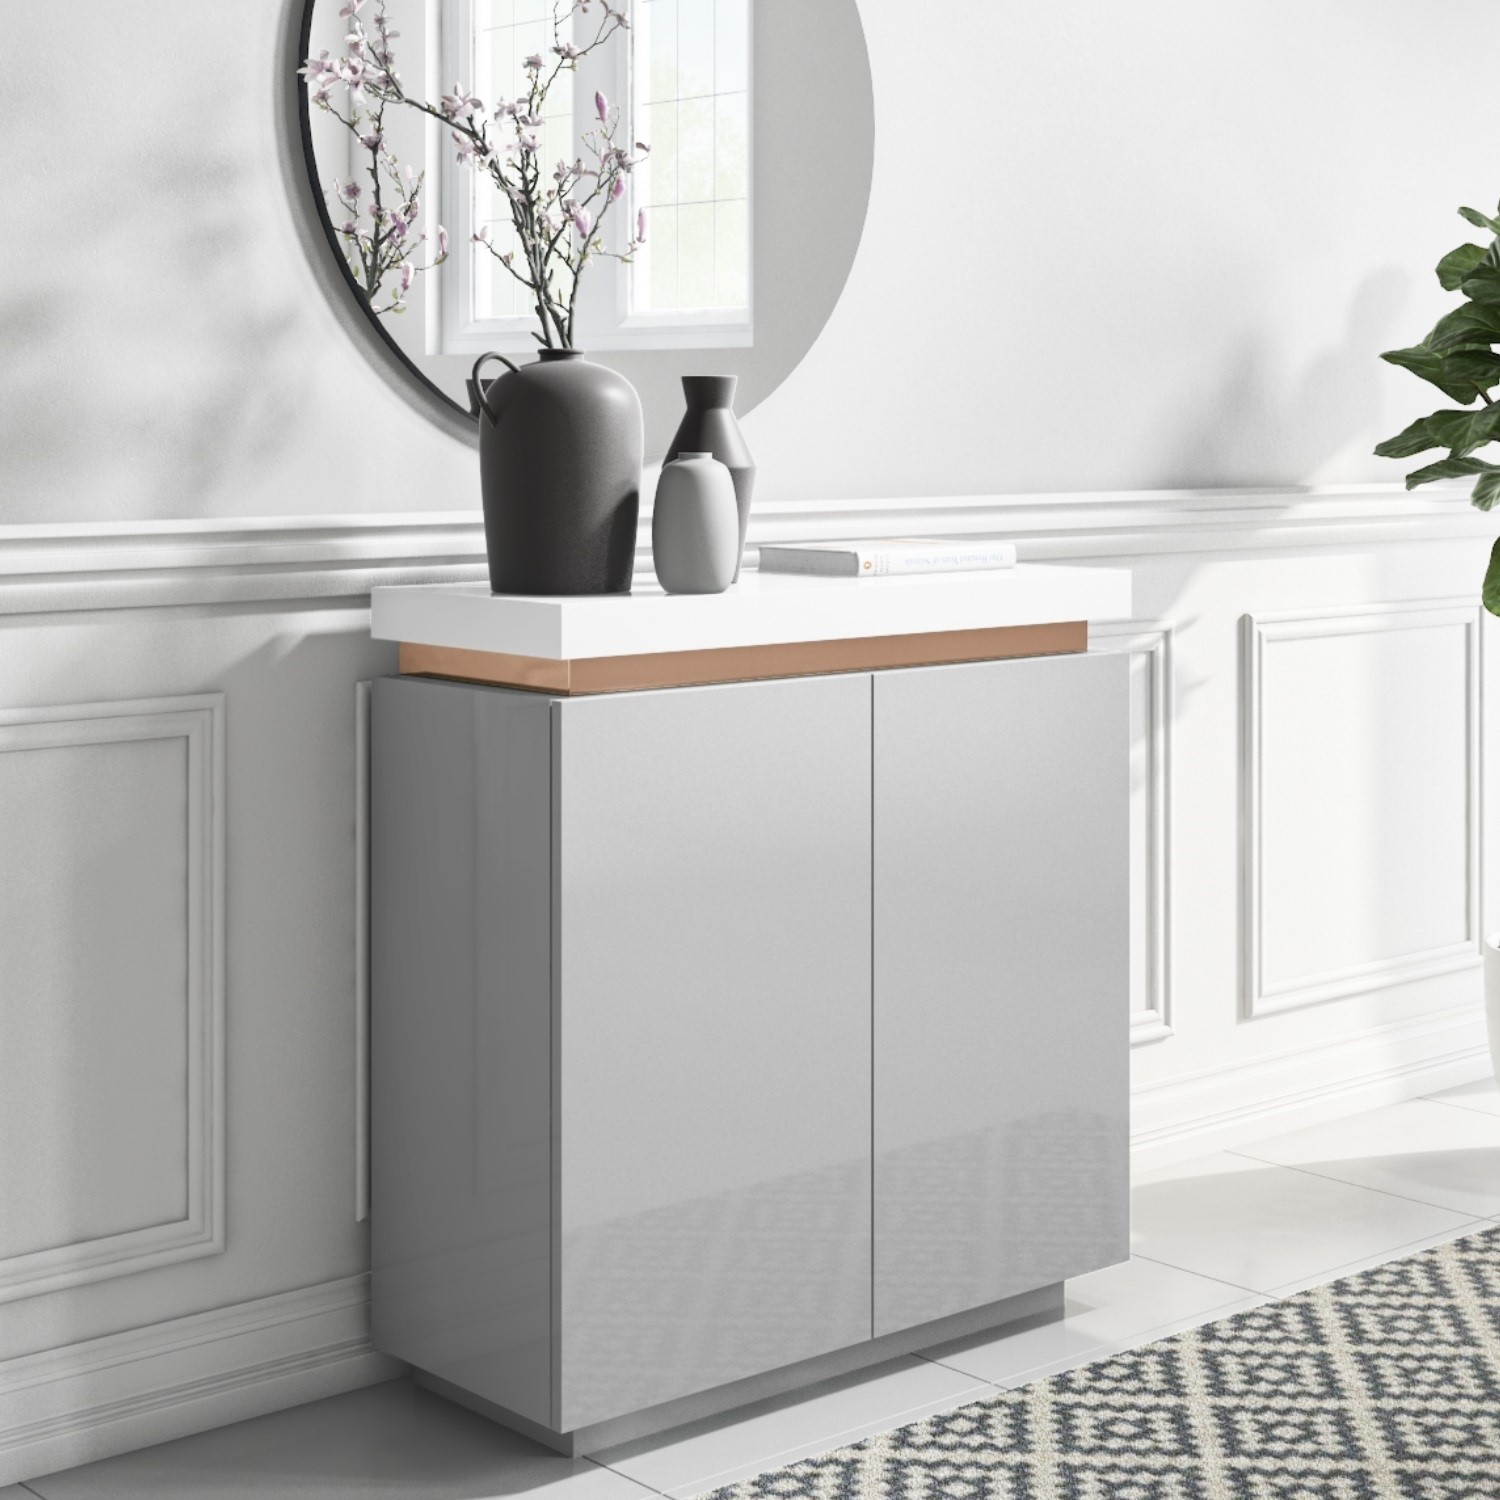 Photo of Small grey high gloss sideboard - 6 shelves - vivienne